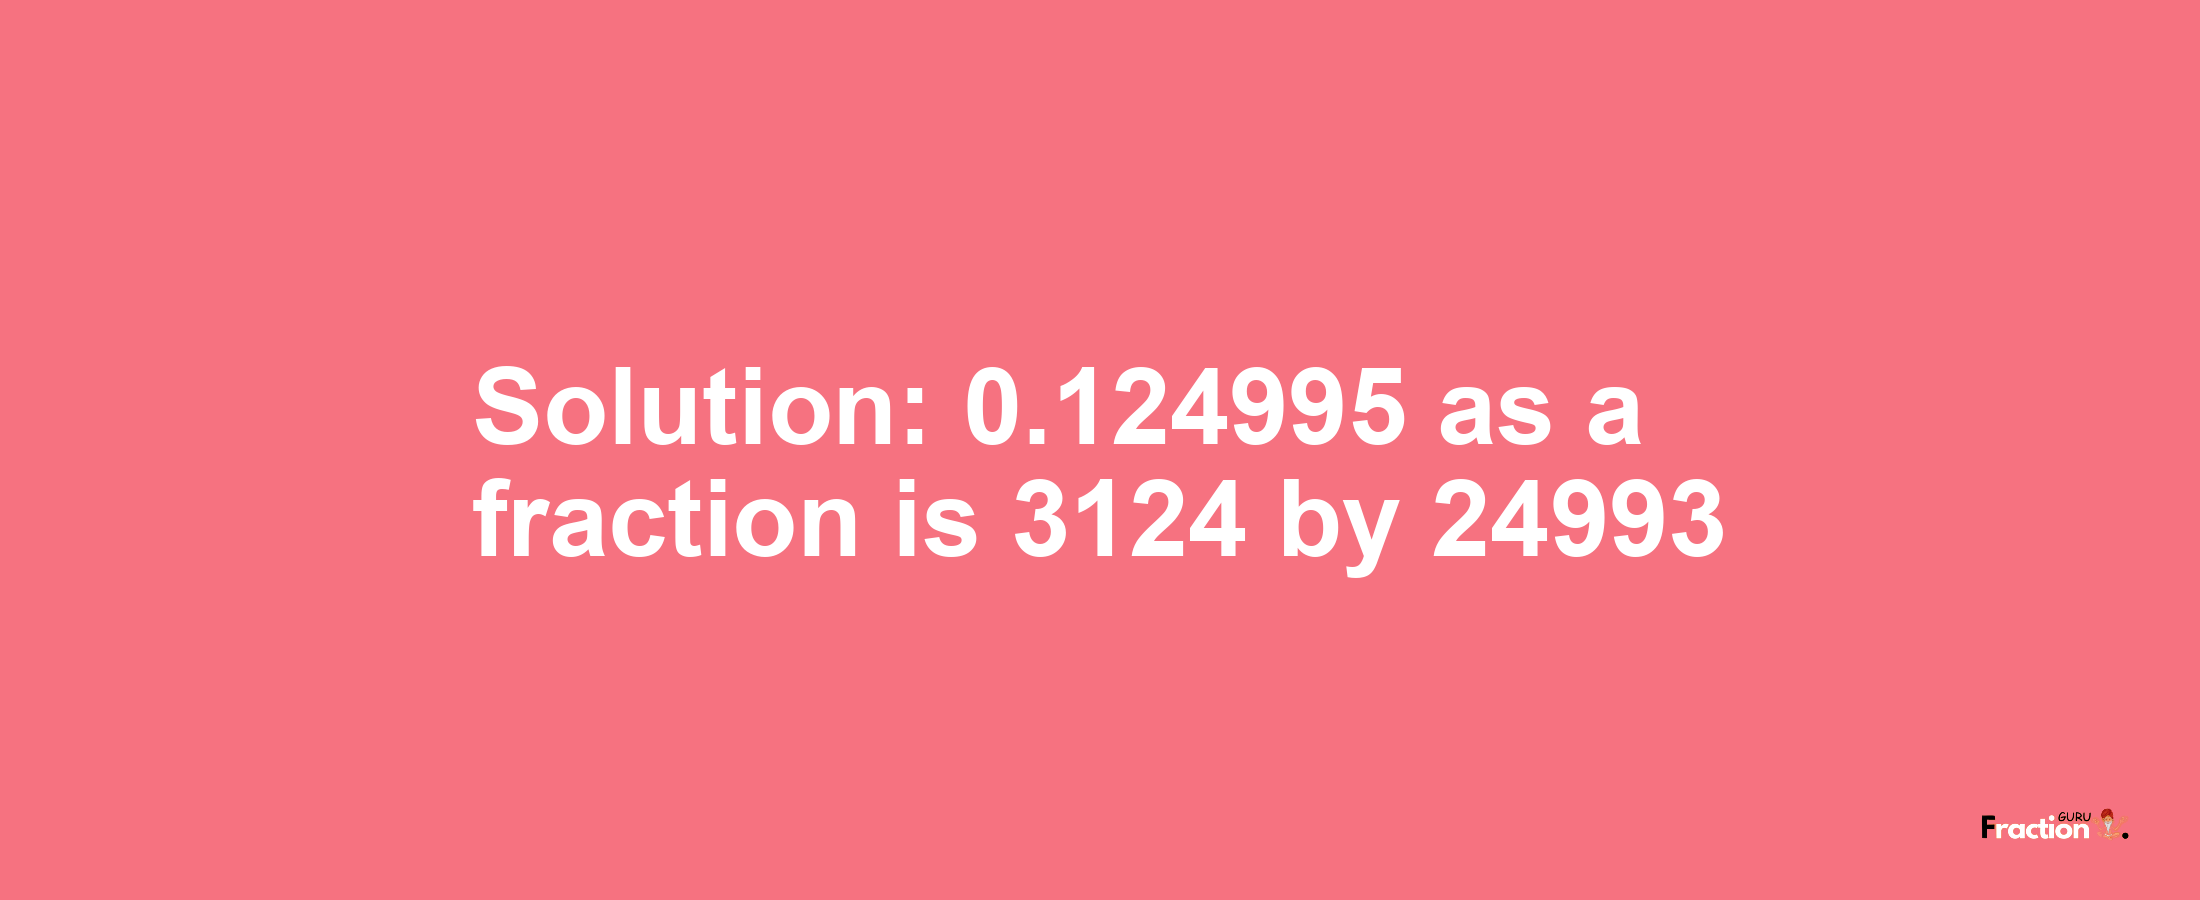 Solution:0.124995 as a fraction is 3124/24993